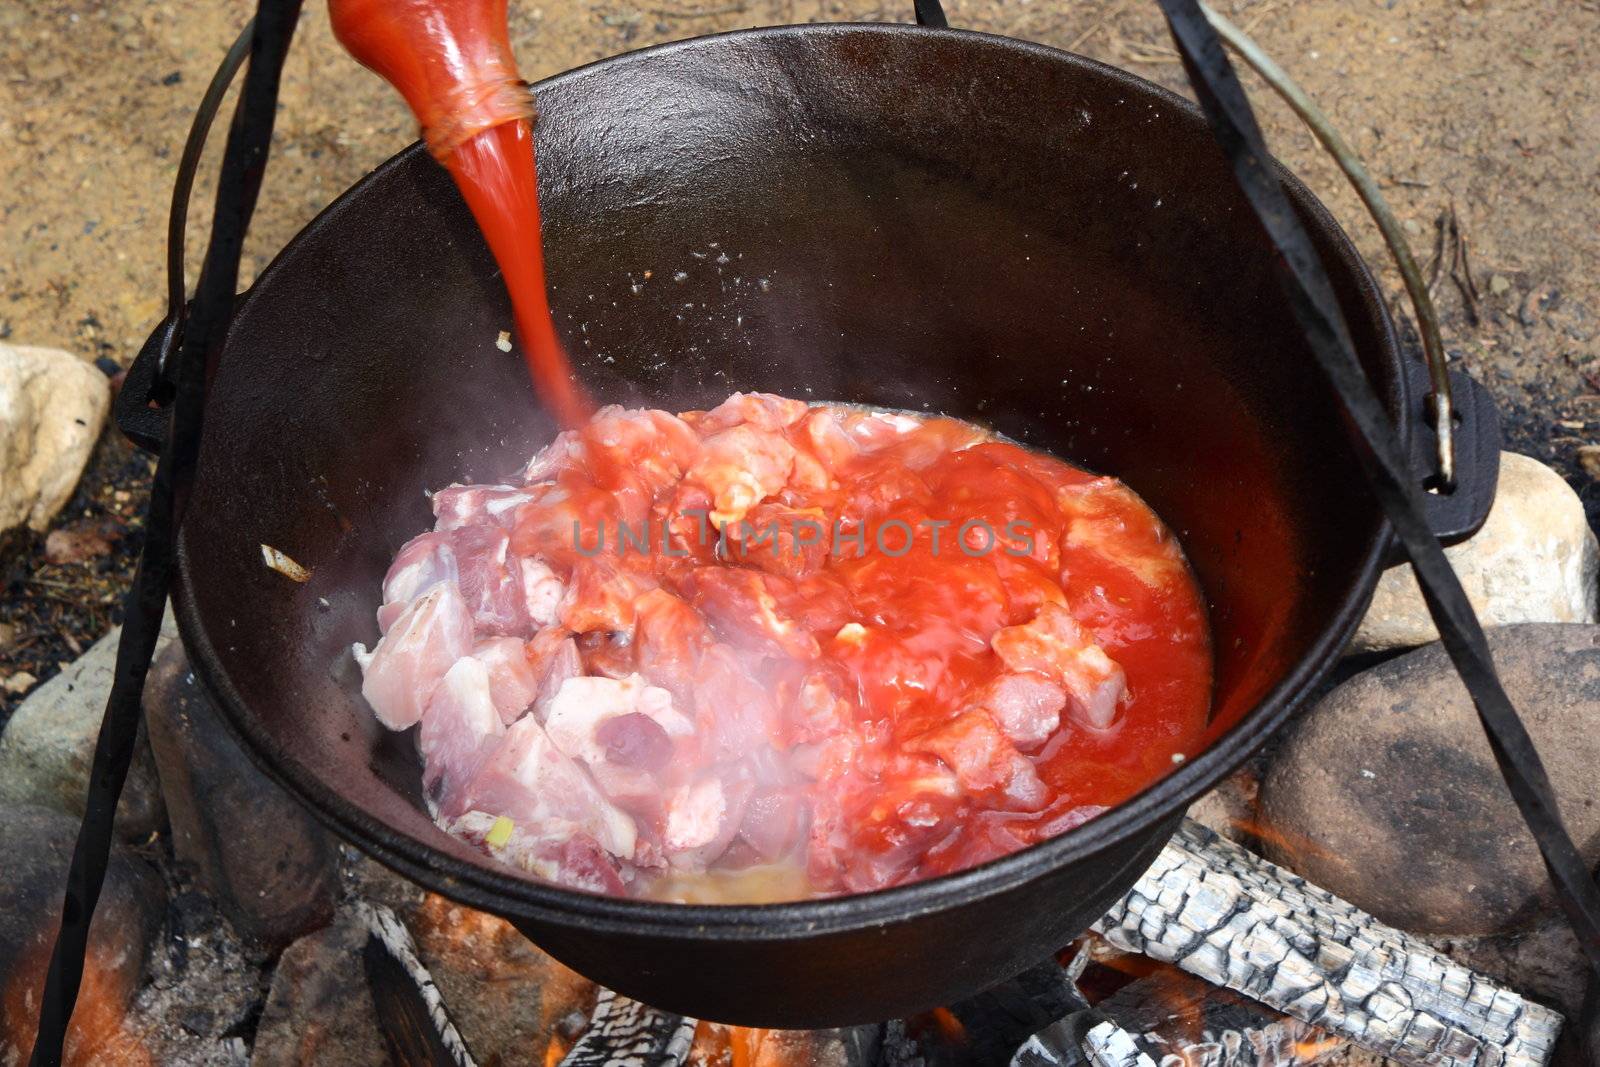 preparing osso buco outdoor in traditional cauldron